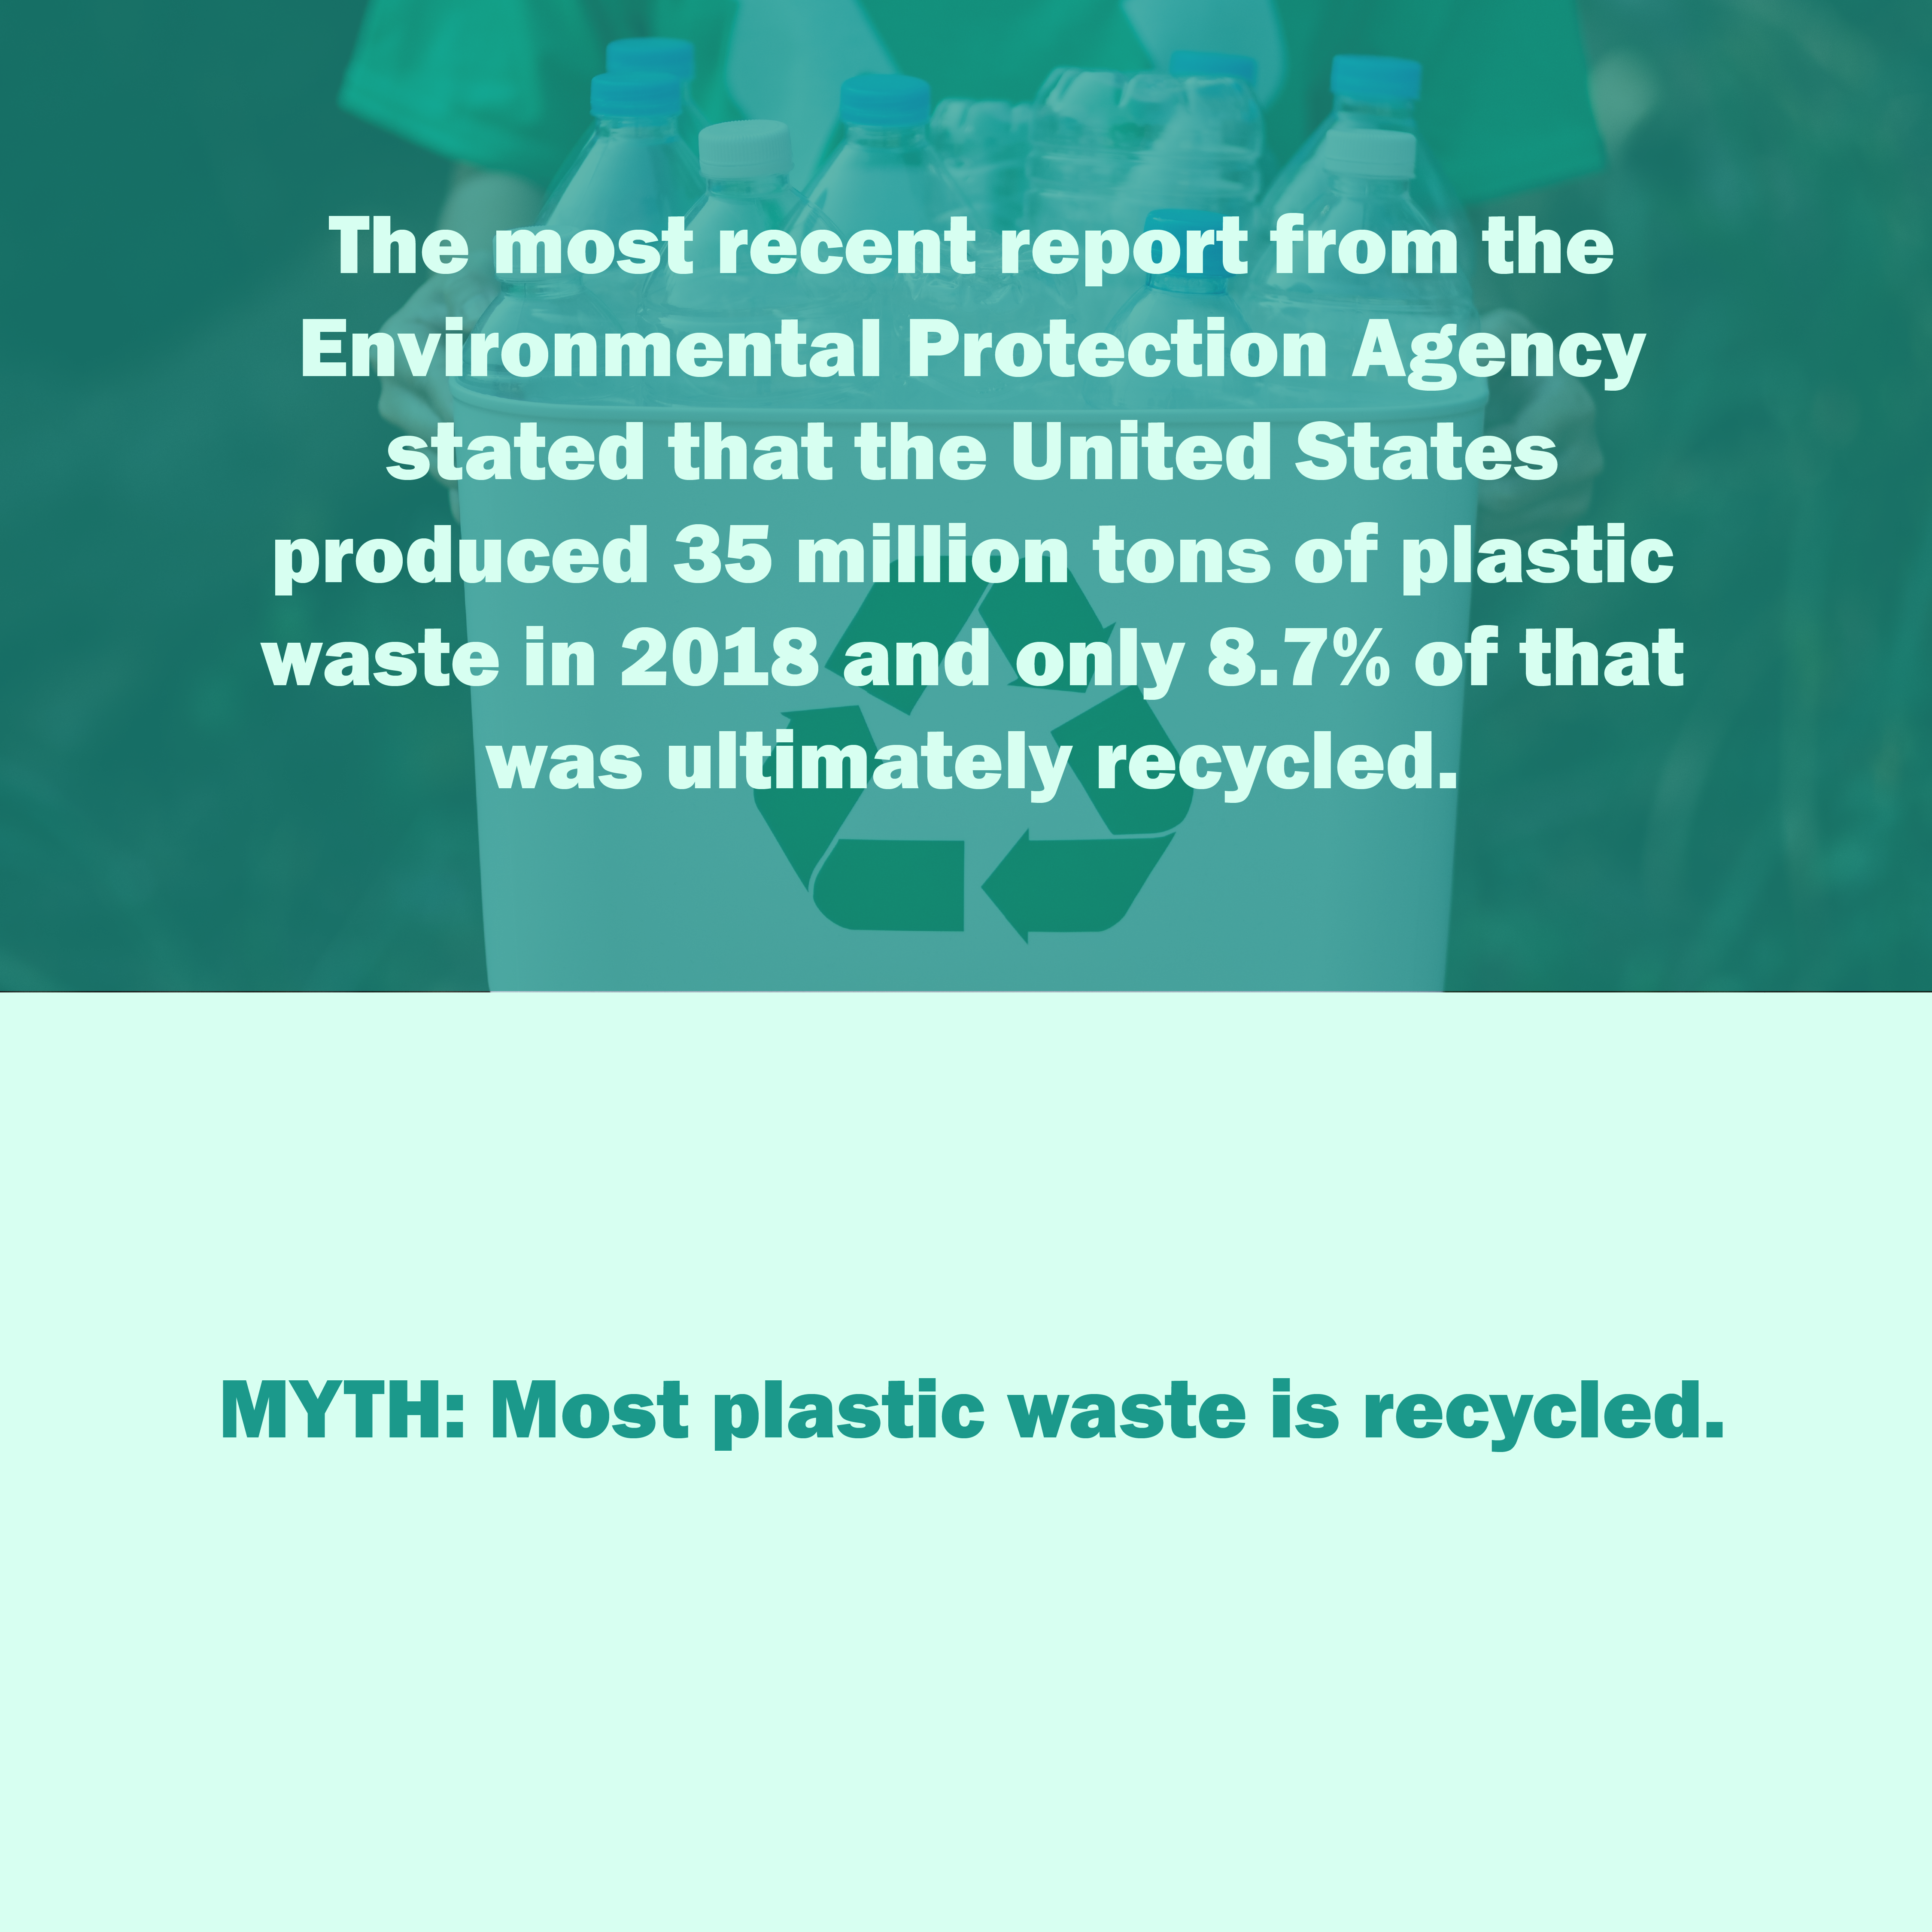 A color blocked infographic that explains how much plastic waste was recycled in 2018 from the United States.